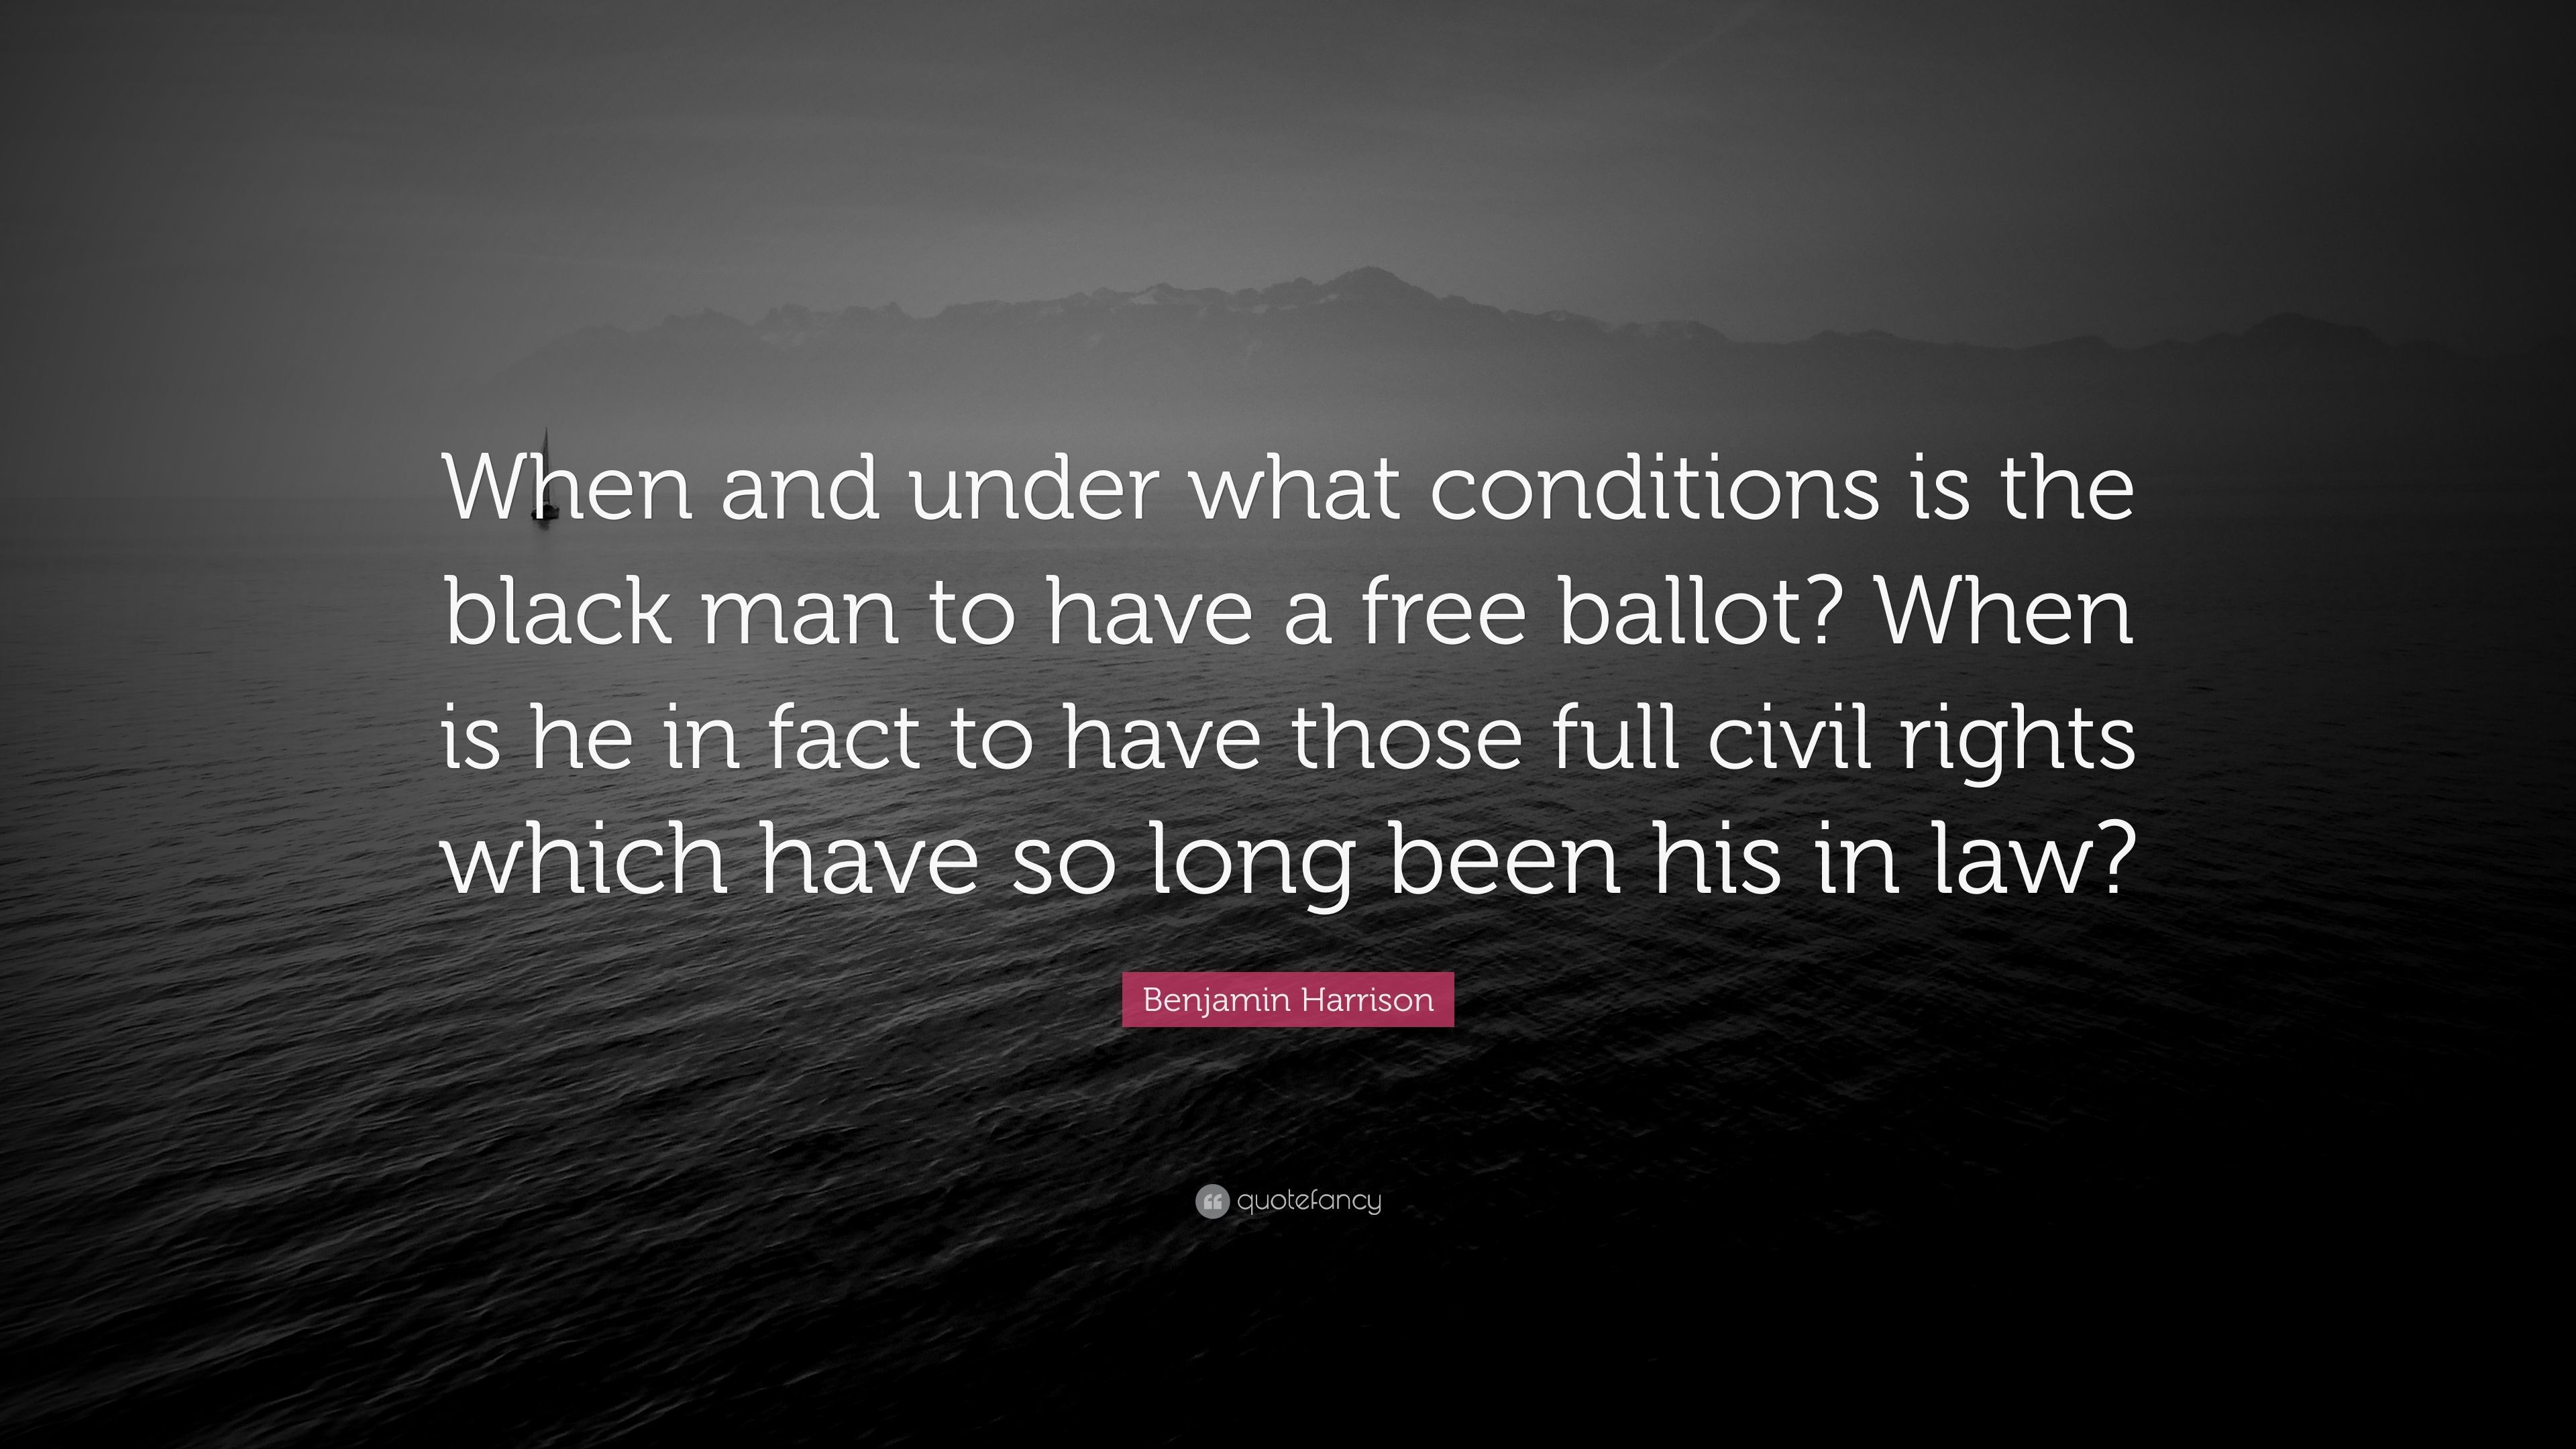 Benjamin Harrison Quote: “When and under what conditions is